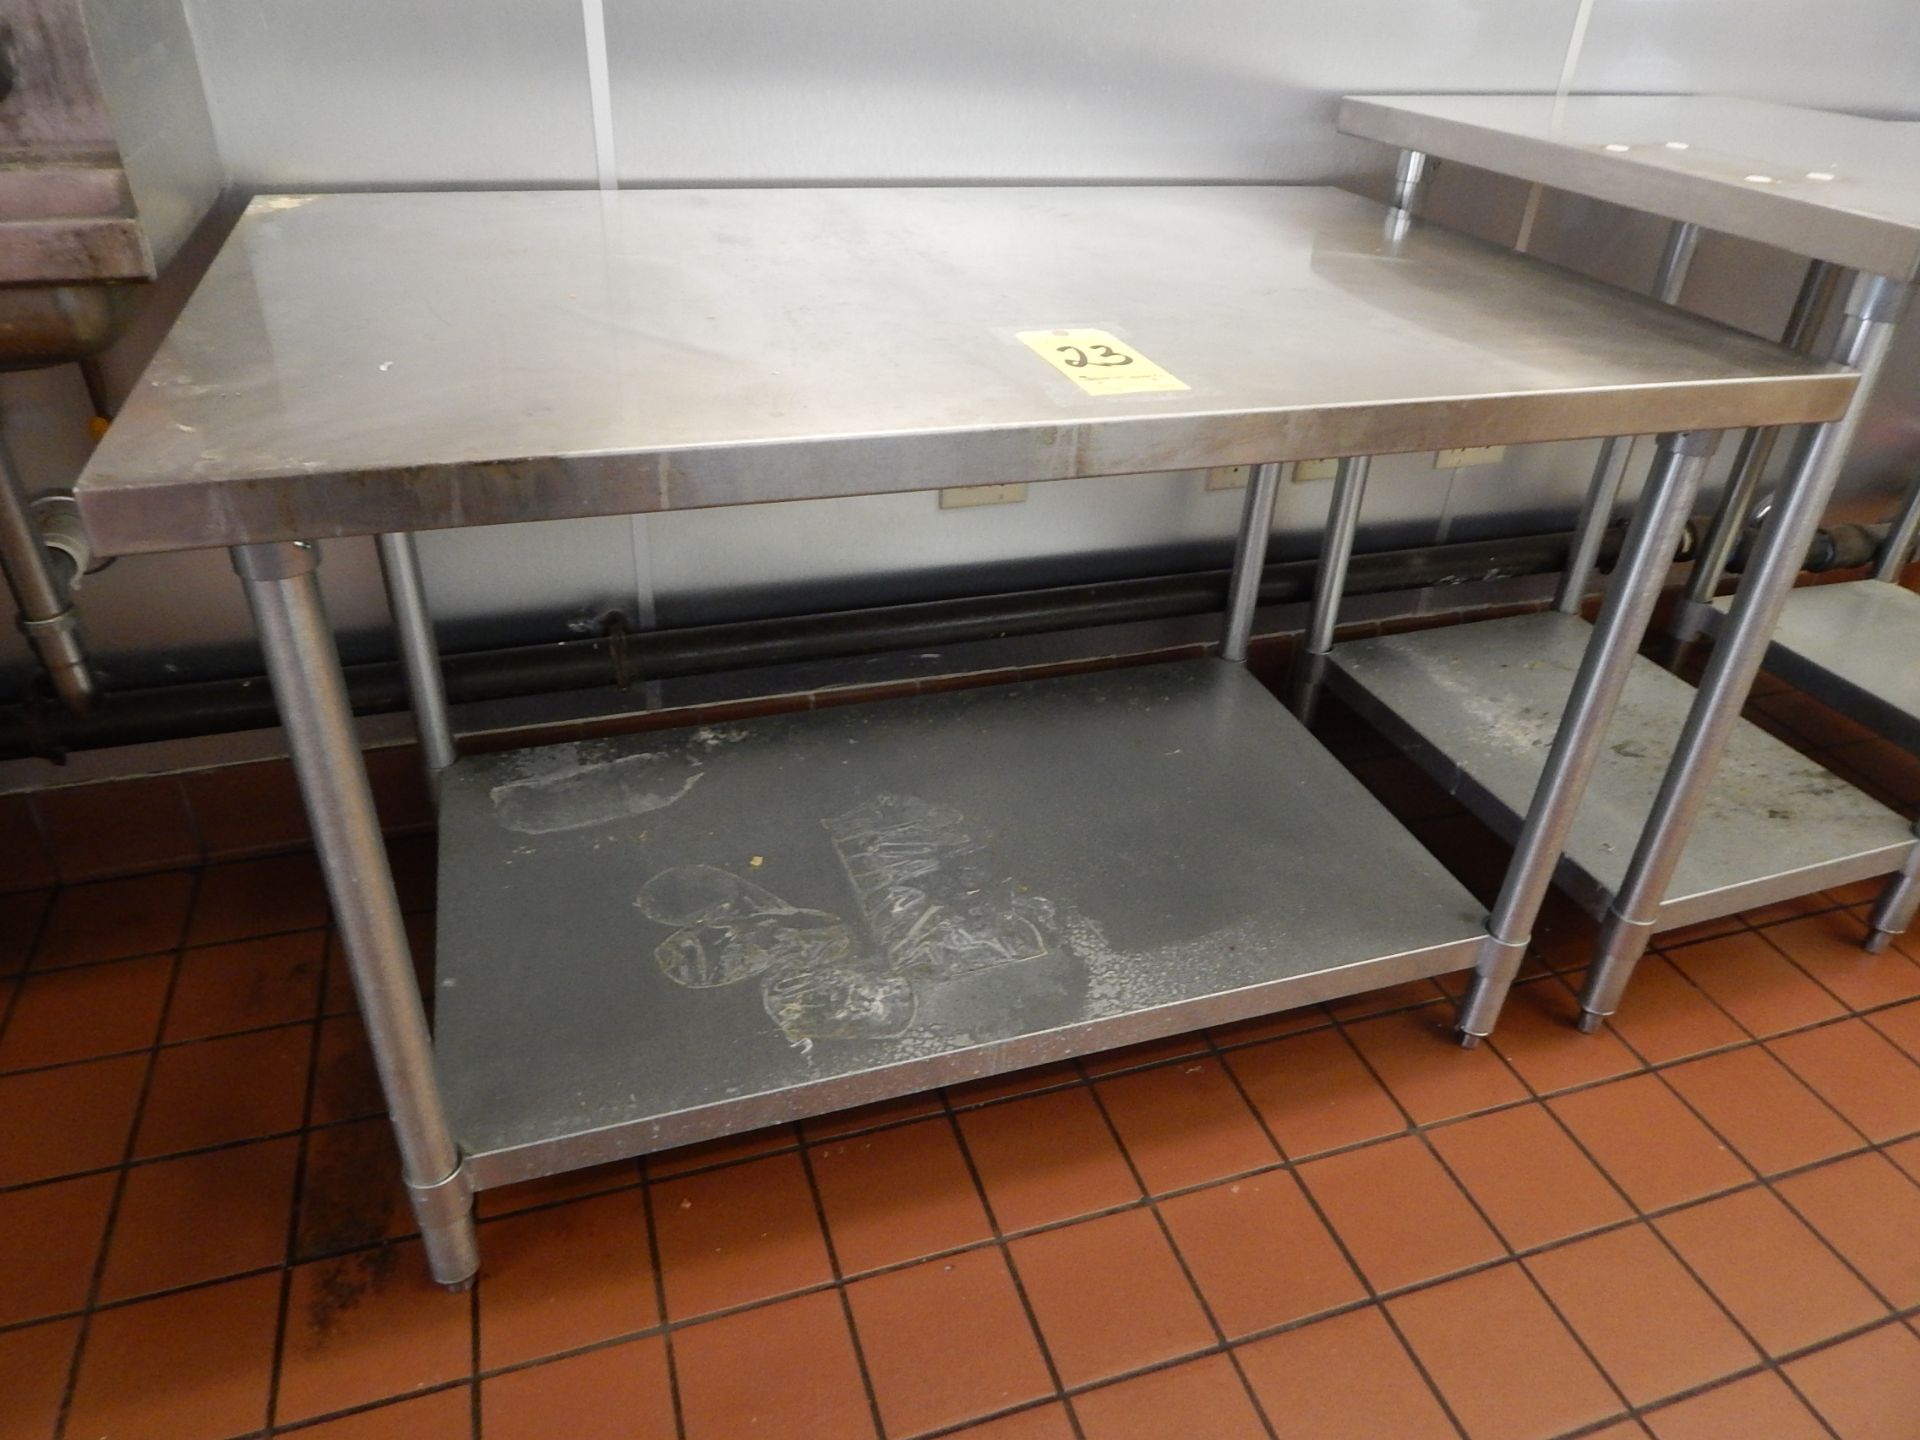 Stainless Steel Table with Galvanized Lower Shelf, 30" x 48"